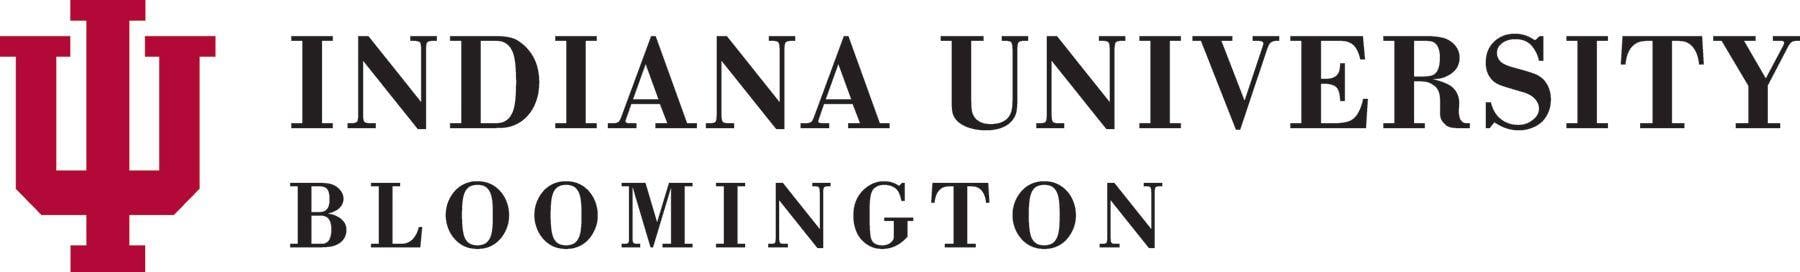 Indiana University Bloomington Logo - Communications: Offices & Services: Departments, Offices & Services ...